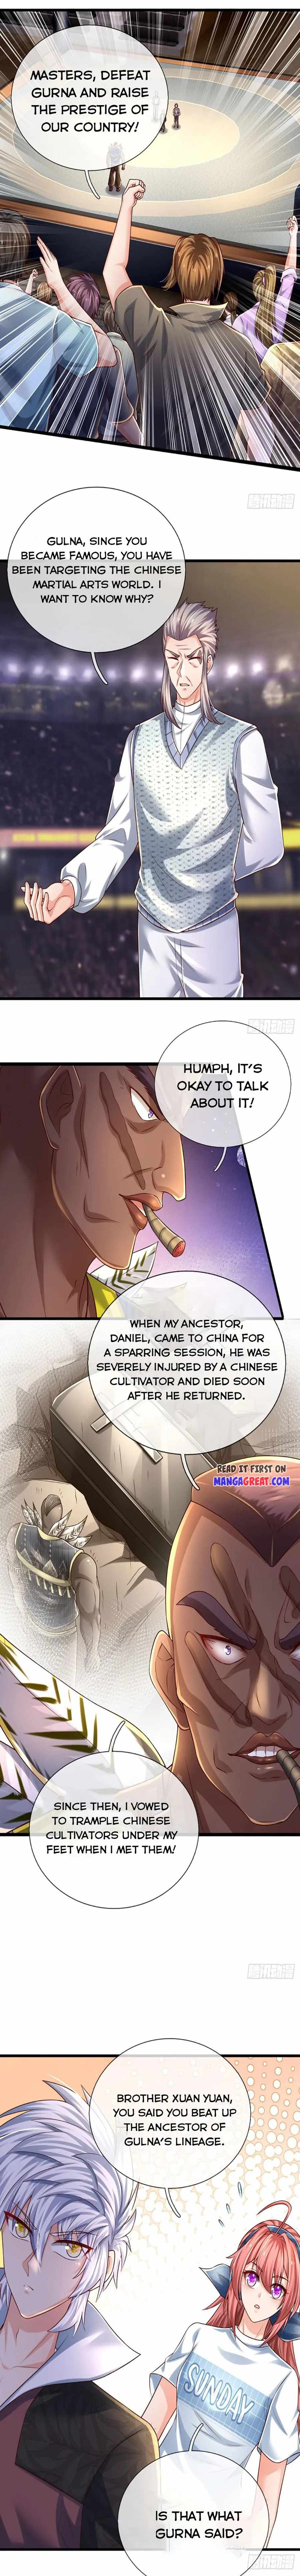 100,000 Levels of Body Refining : All the dogs I raise are the Emperor chapter 230 page 7